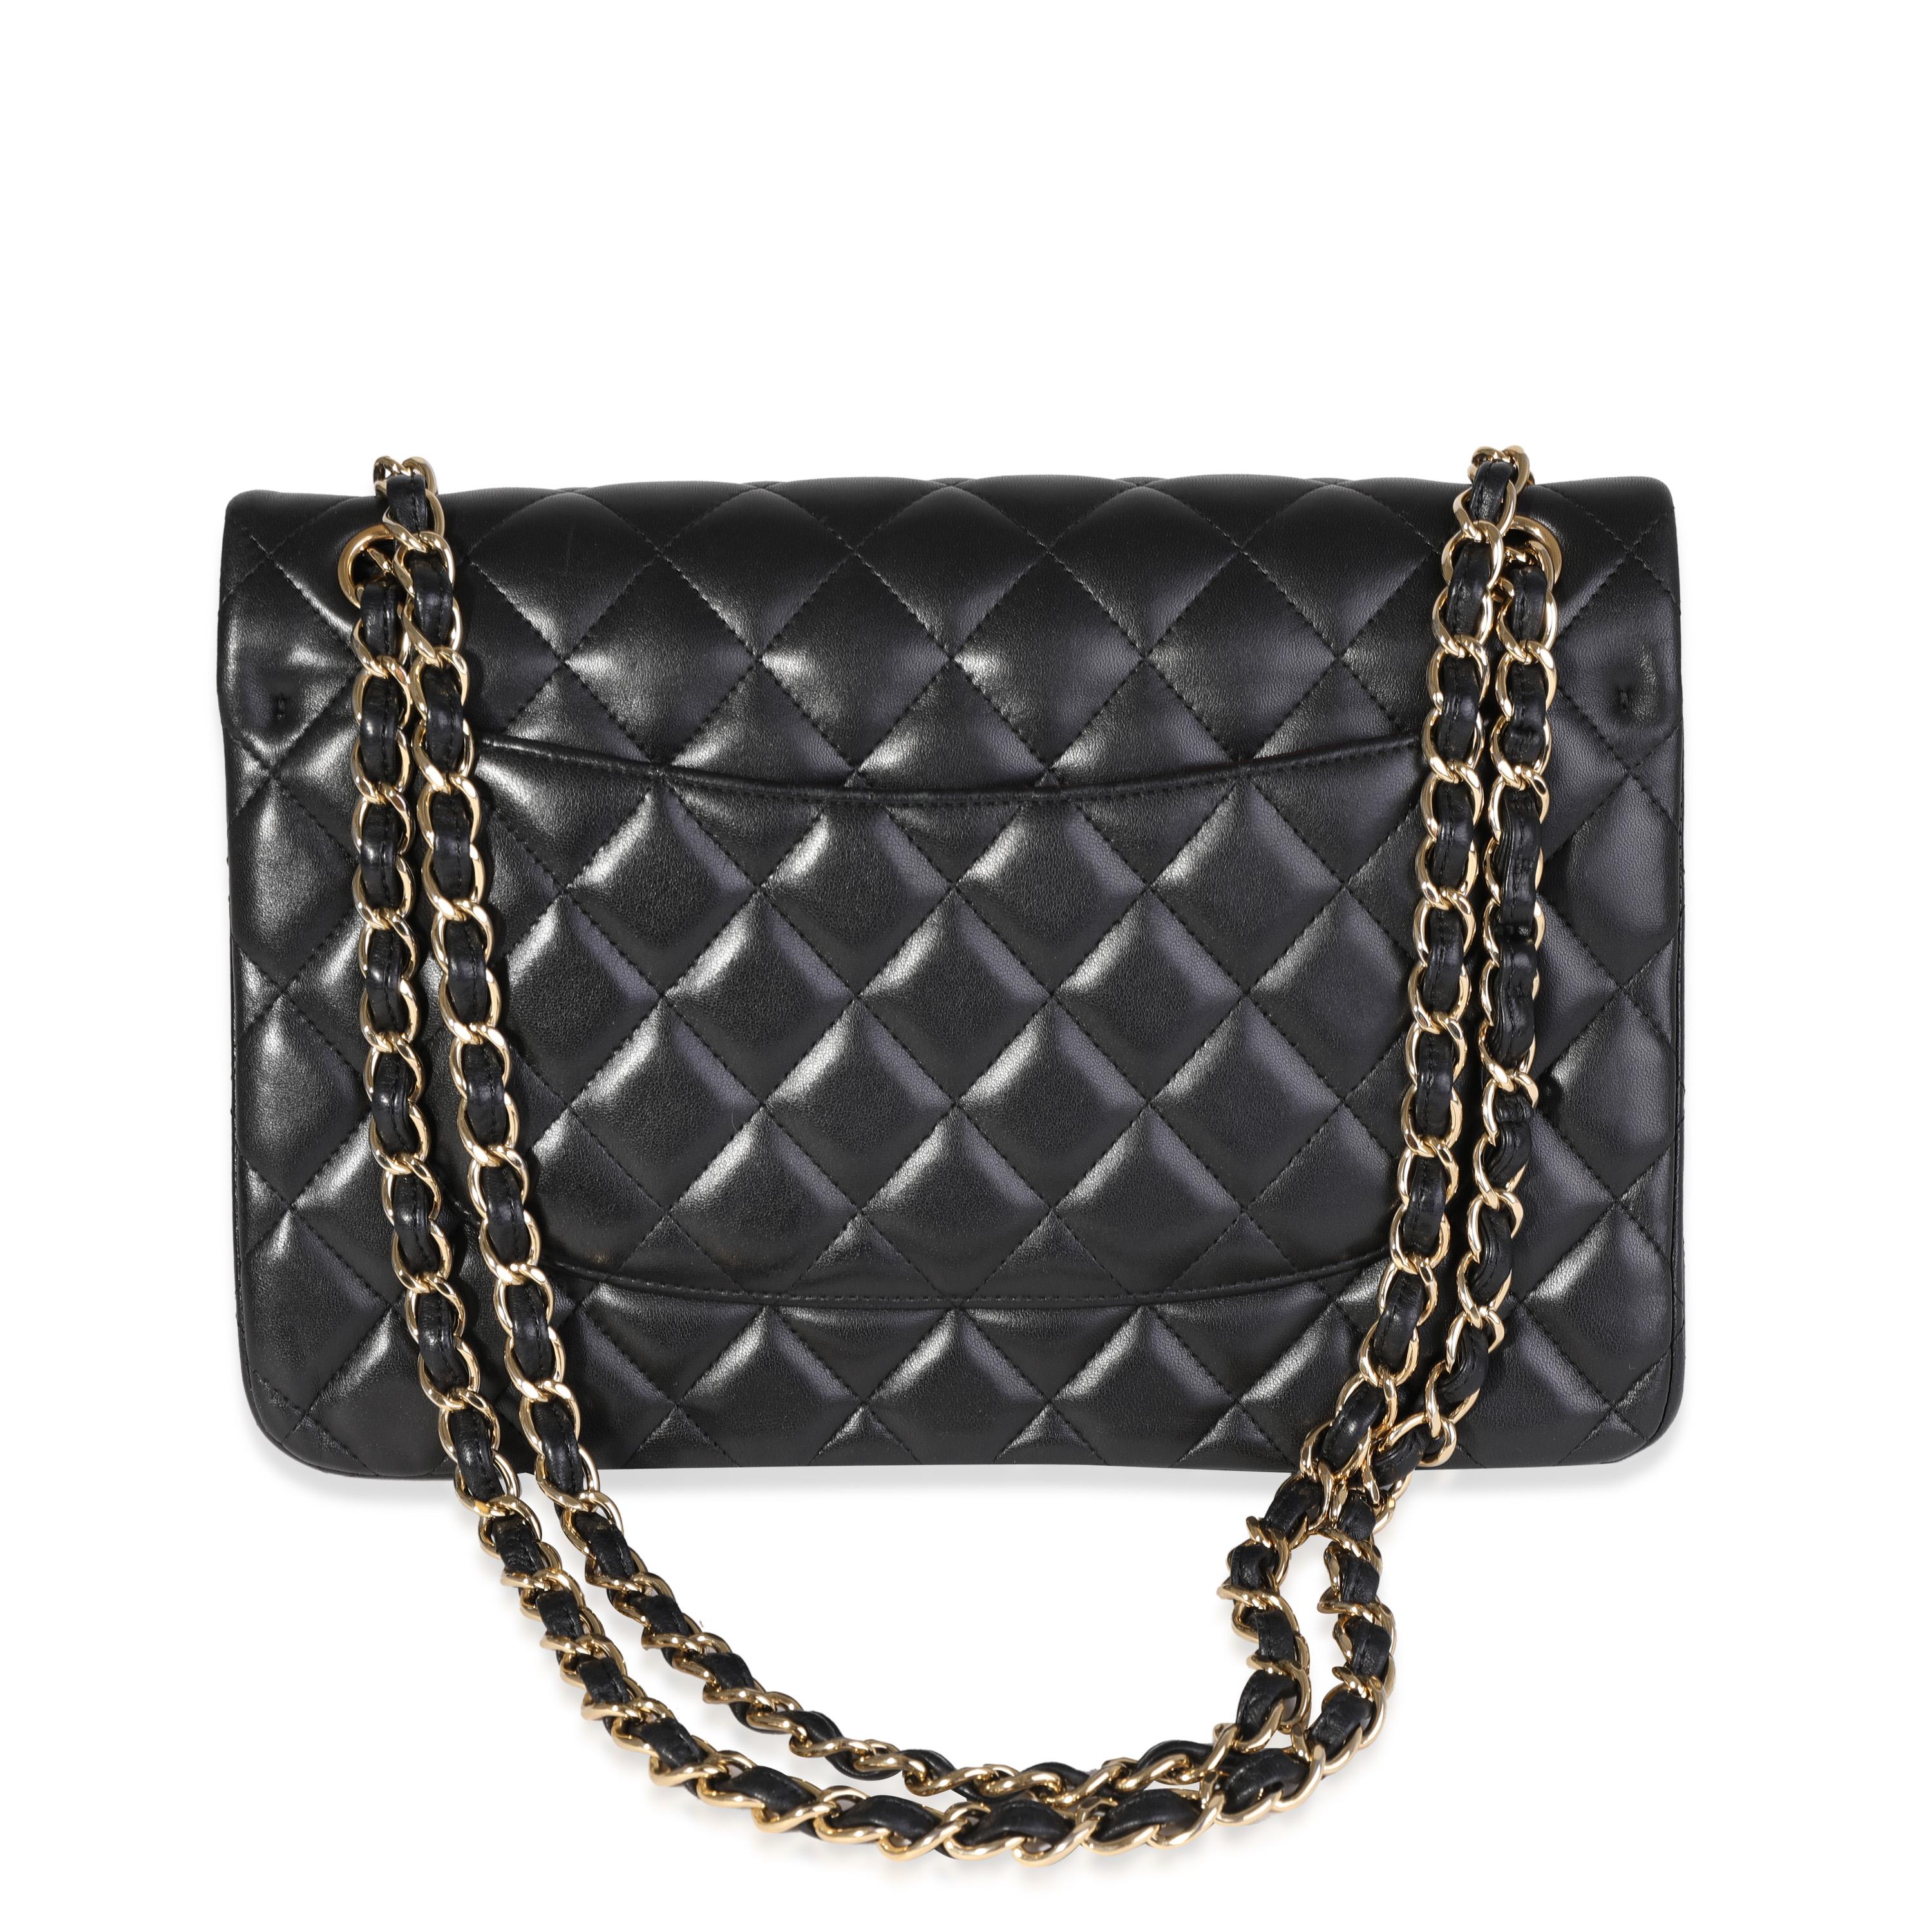 Chanel Black Quilted Lambskin Jumbo Classic Double Flap Bag In Excellent Condition For Sale In New York, NY